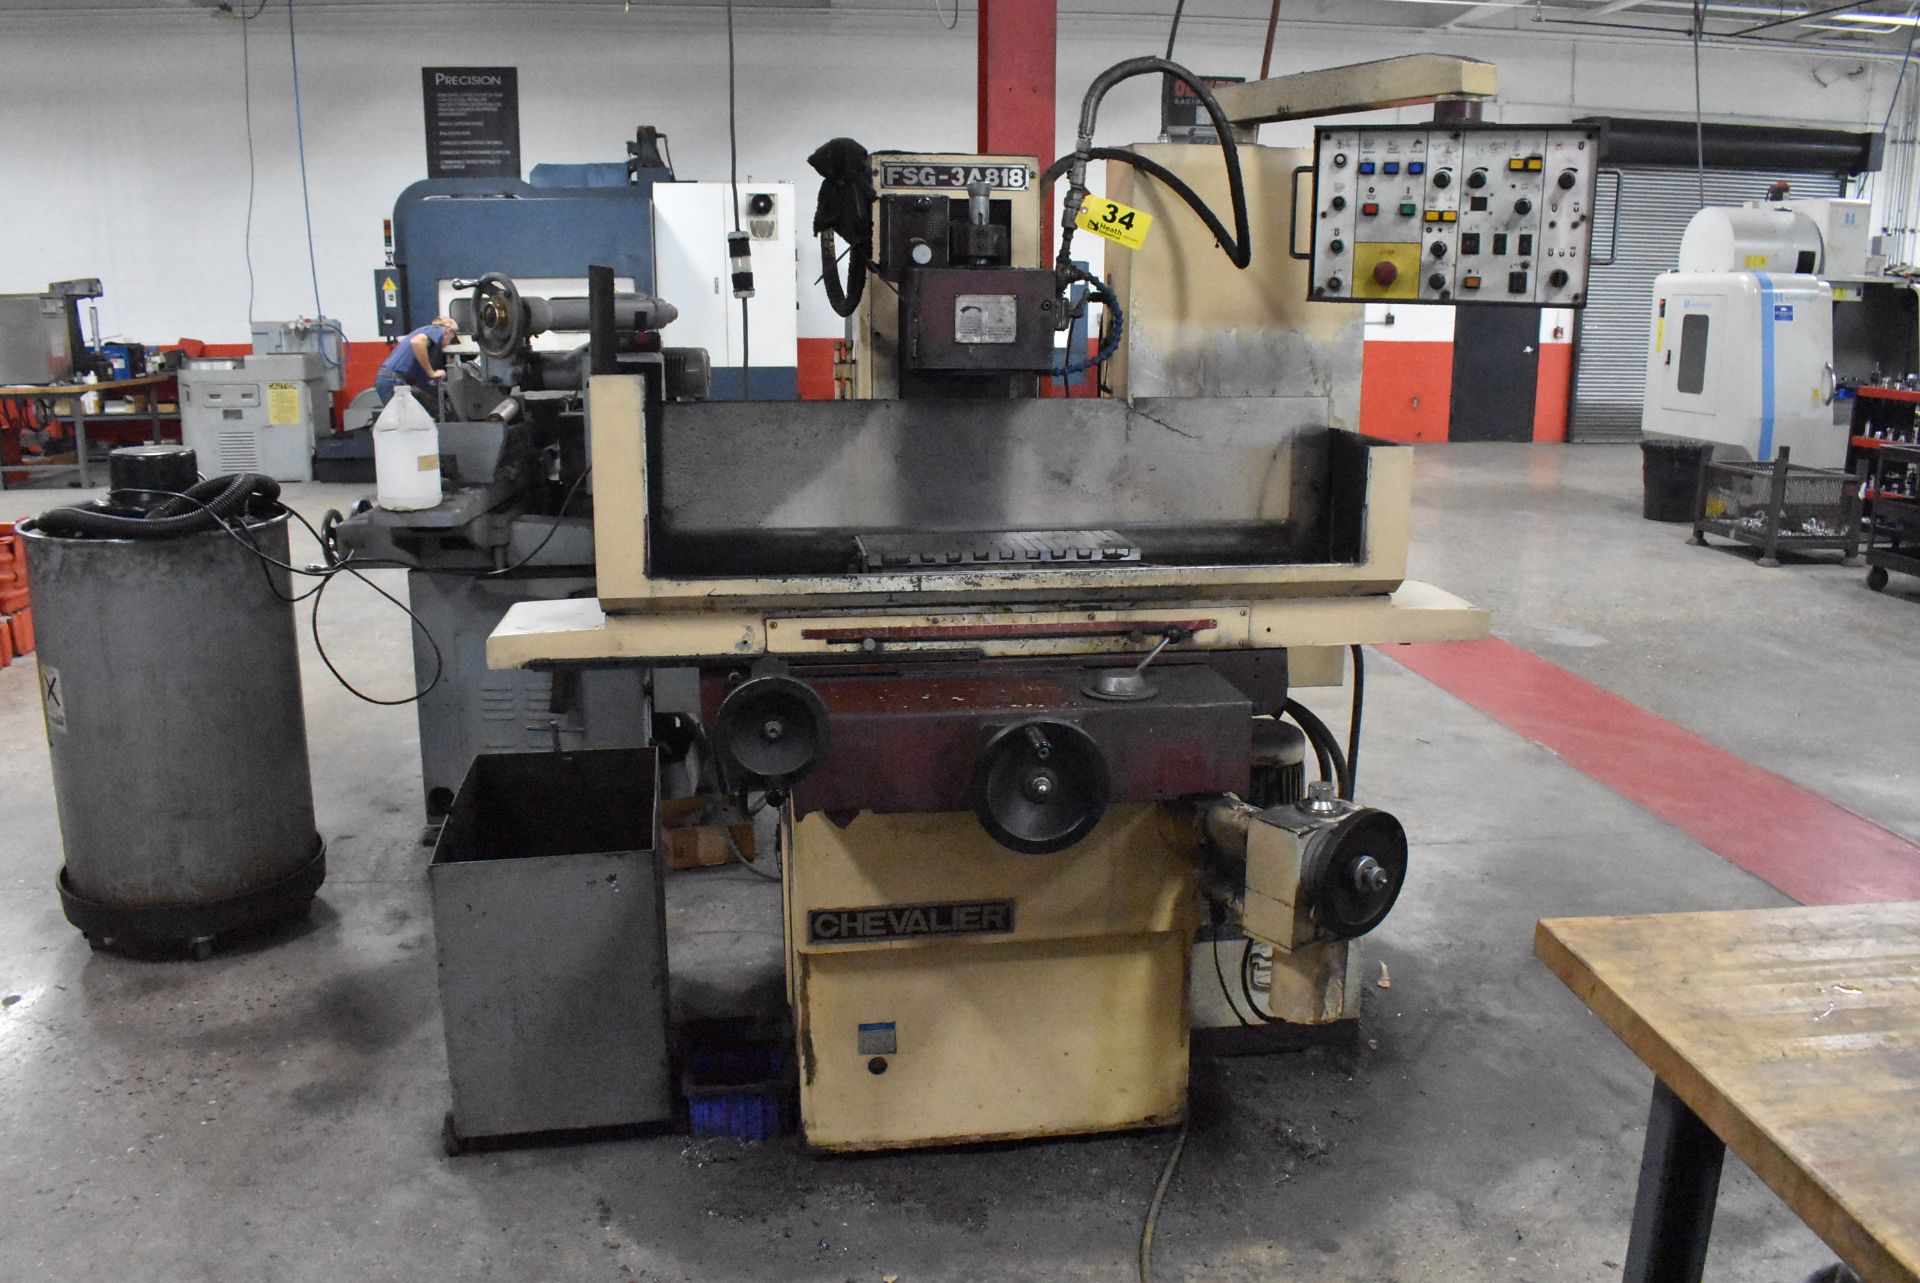 CHEVALIERÂ 8" x 18" MODEL FSG-3A818 HYDRAULIC SURFACE GRINDER, S/N M3841007, WITH ELECTRO MAGNETIC - Image 3 of 11